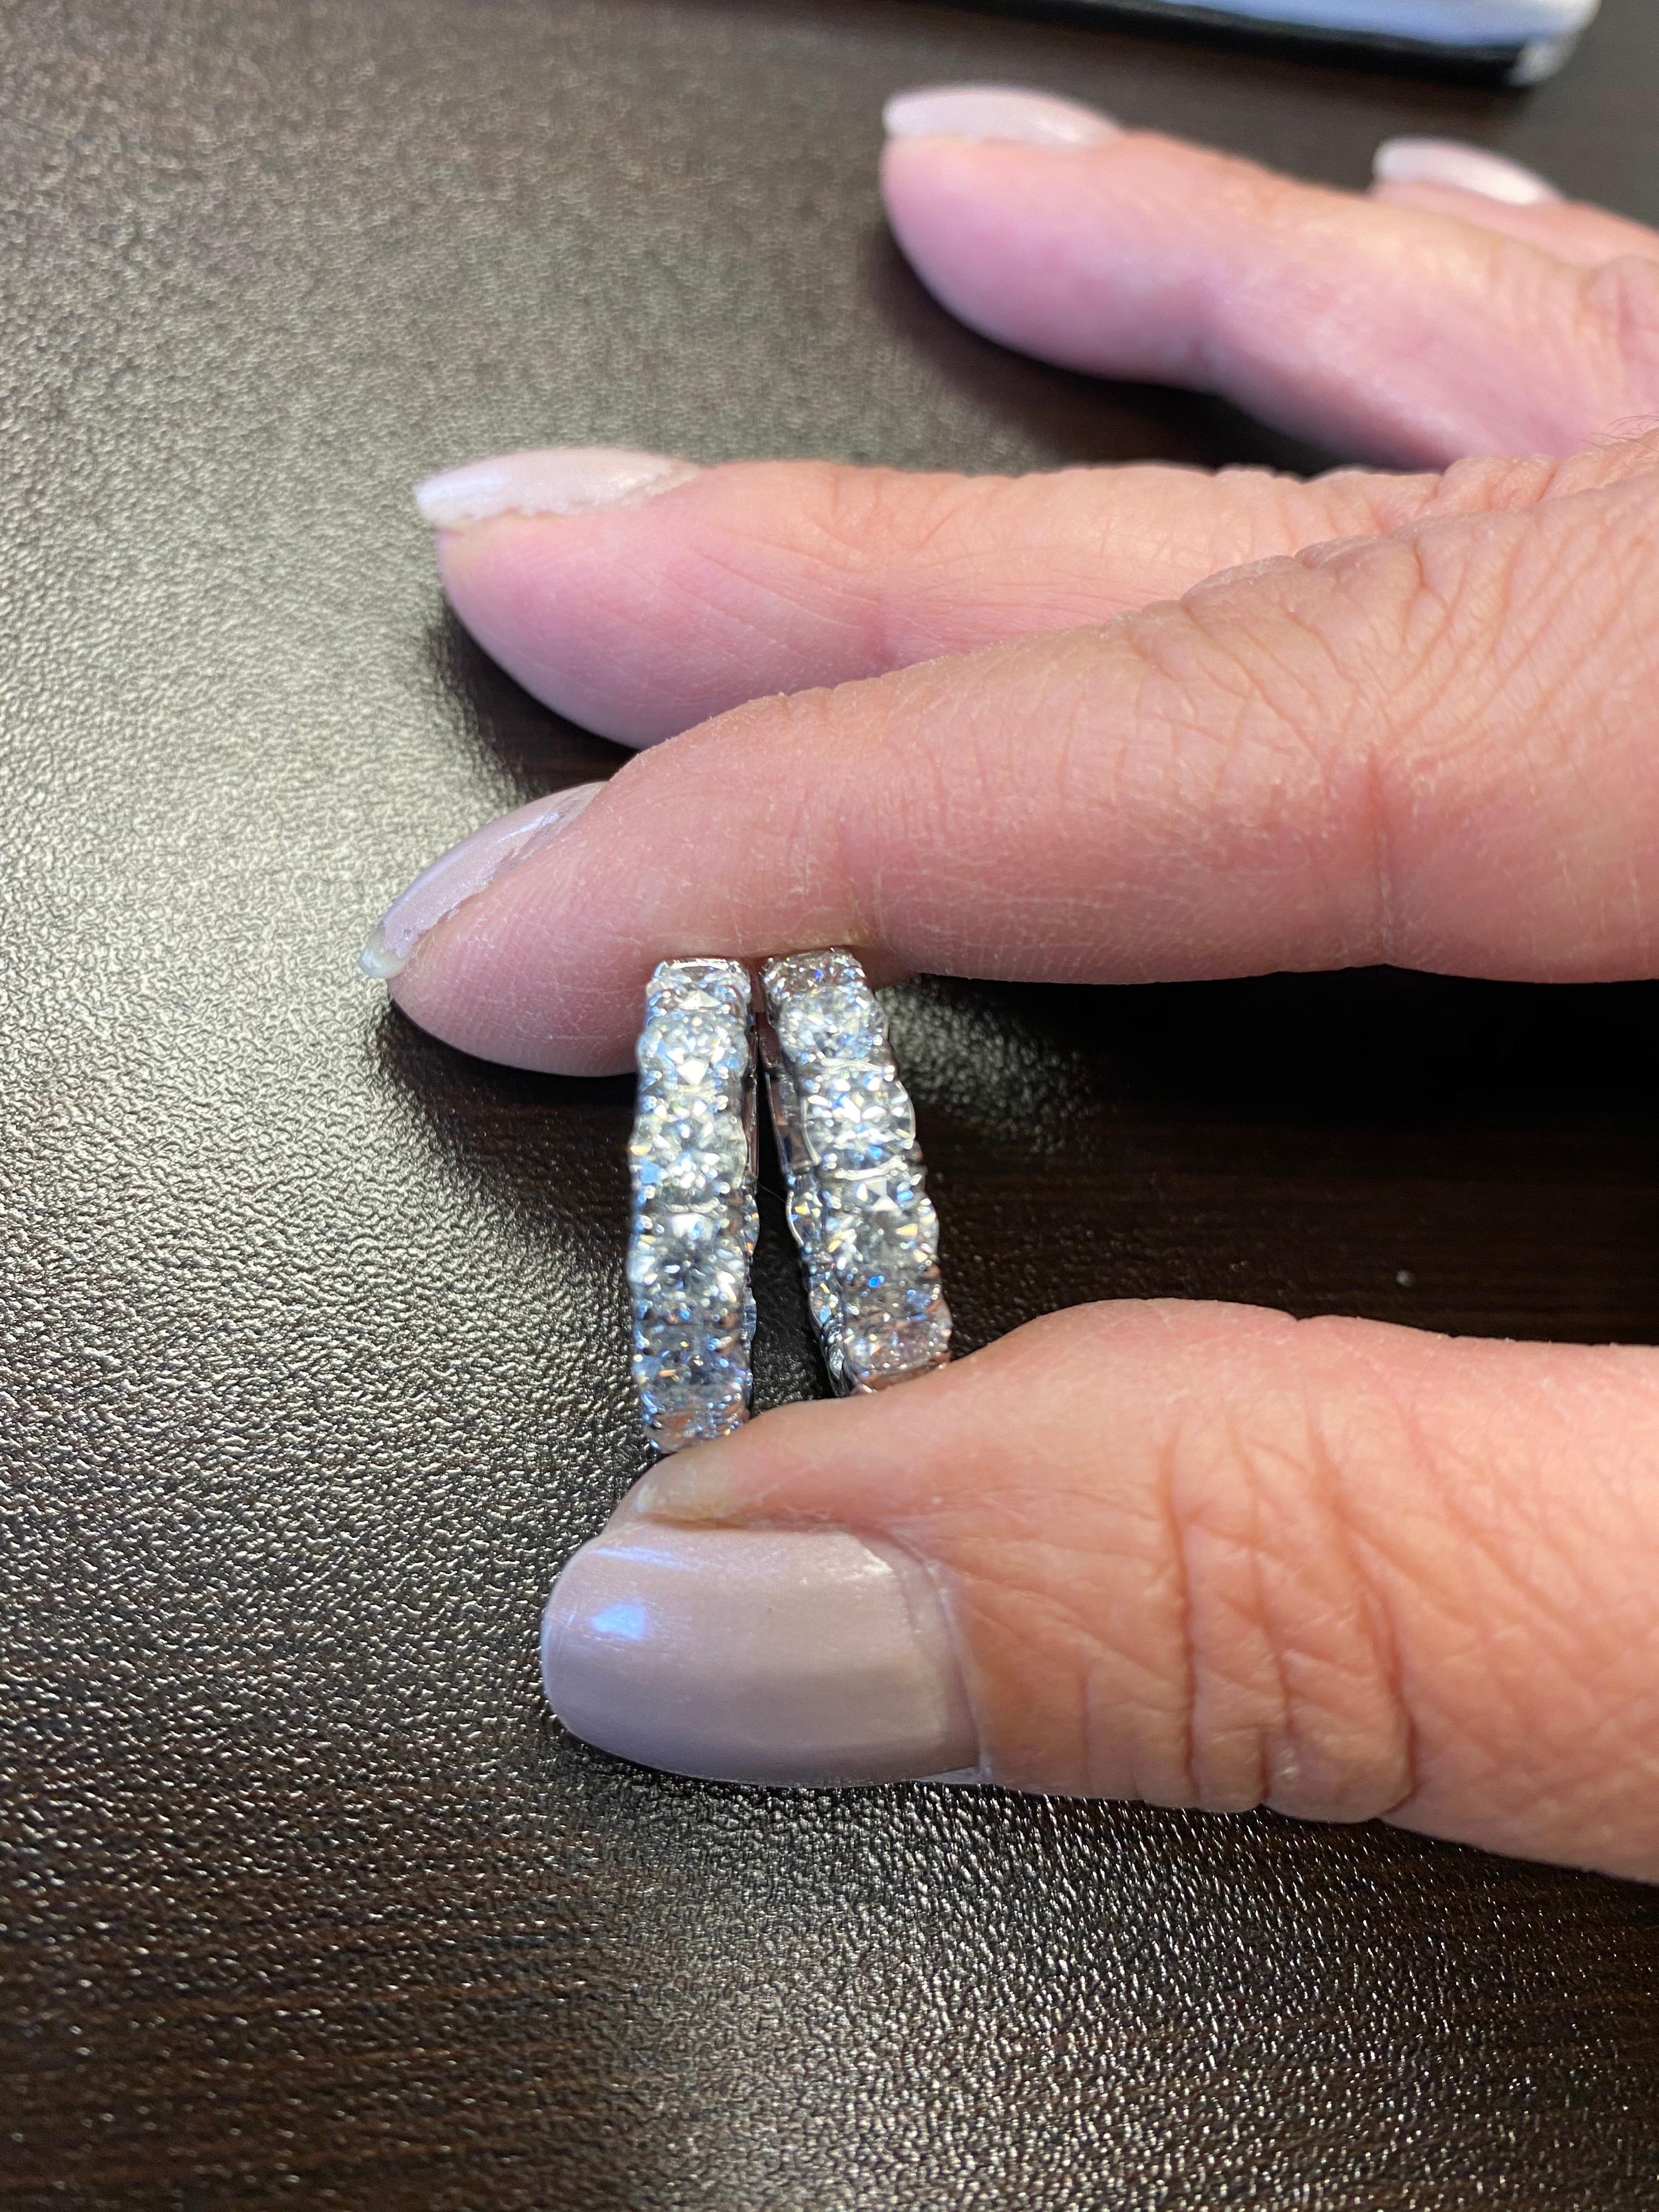 Diamond hoop earrings set in 14K white gold. Each stone weighs 0.35 carats. The color of the stones are G, the clarity is SI1-SI2. The total diamond weight of the earrings is 6.02 carats. The diameter of the hoops is 3/4 of an inch. 